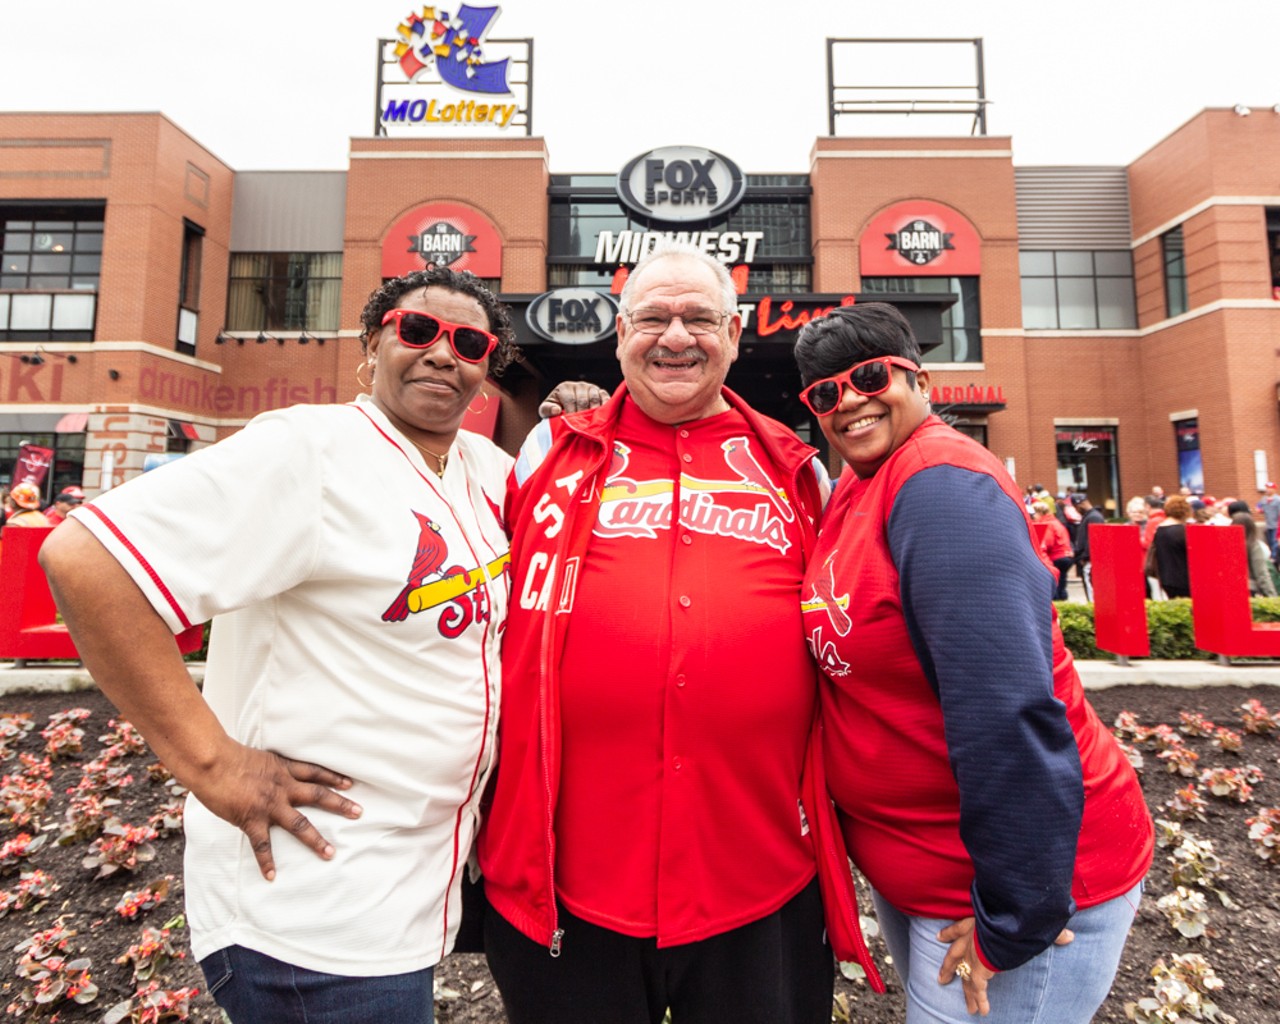 All of the Happy People We Saw at the Cardinals' Home Opener